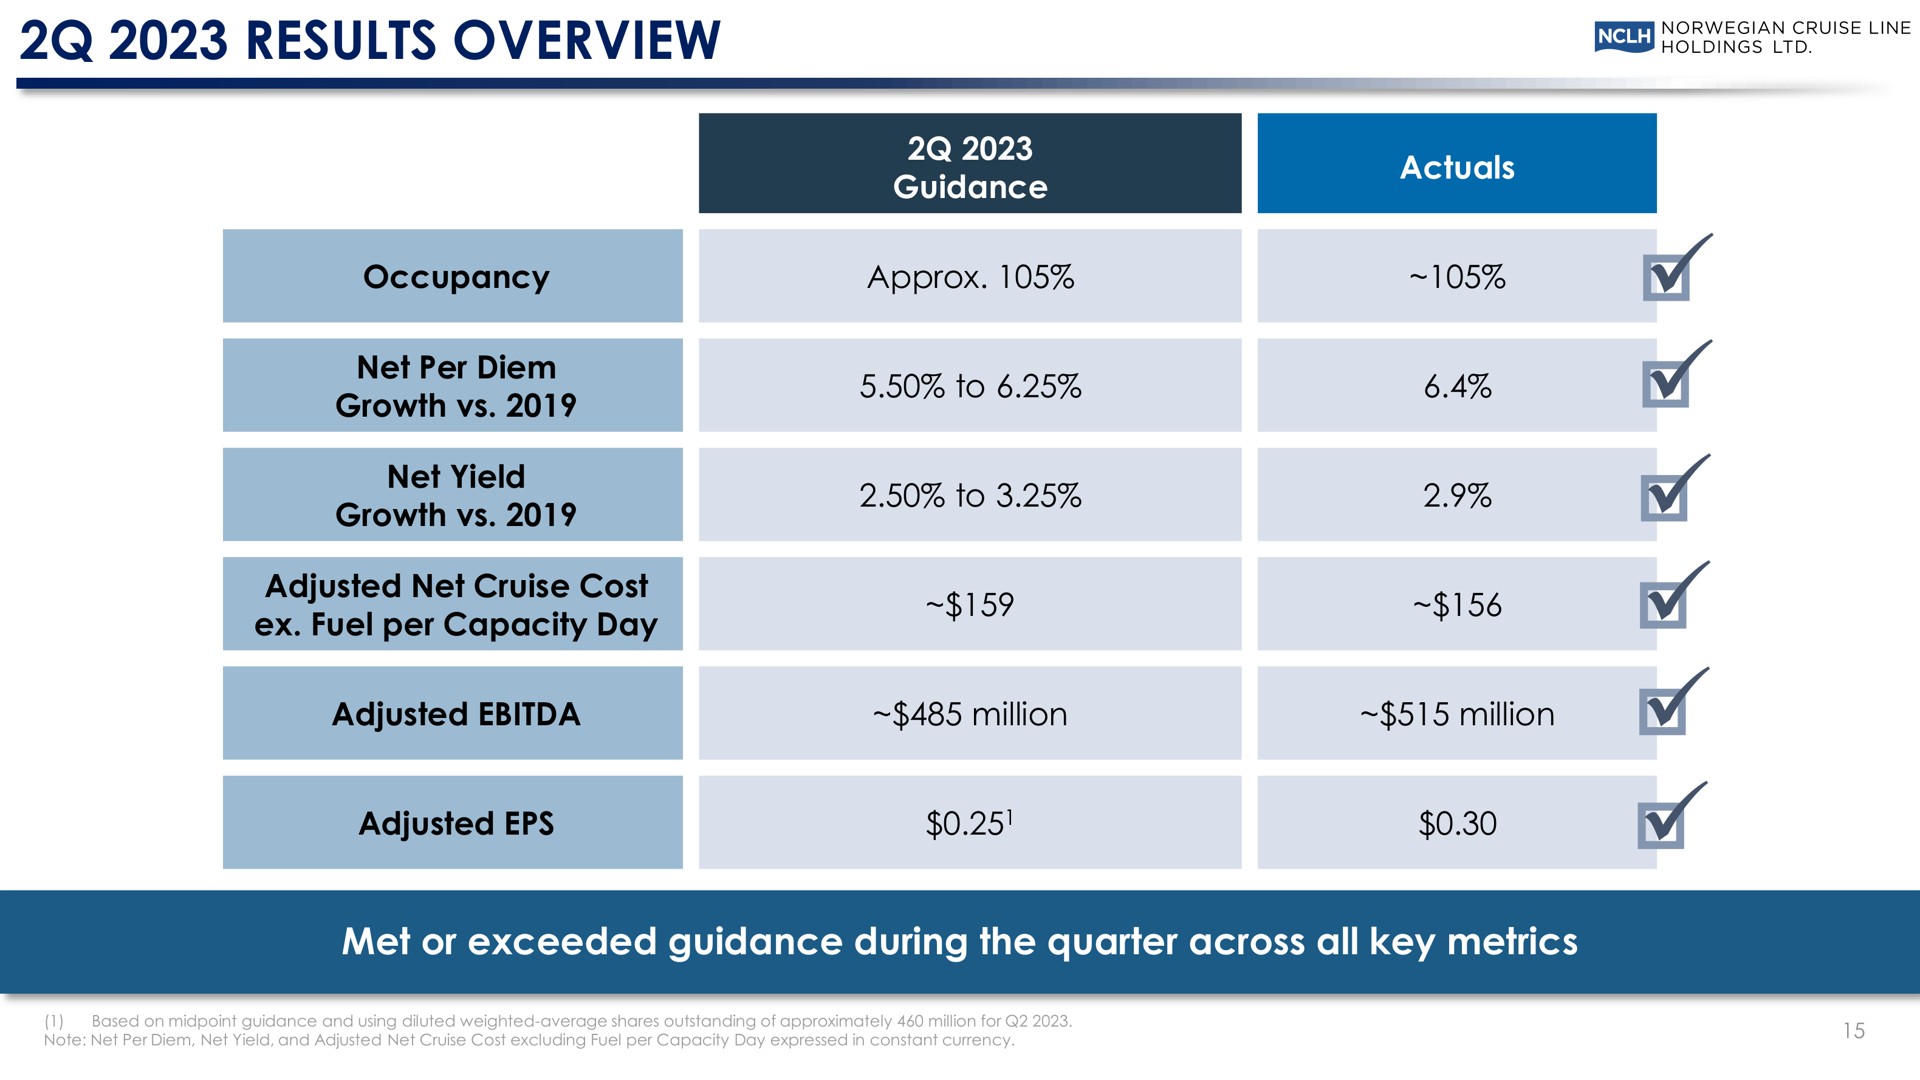 results overview met or exceeded guidance during the quarter across all key metrics stones net yield adjusted | Norwegian Cruise Line